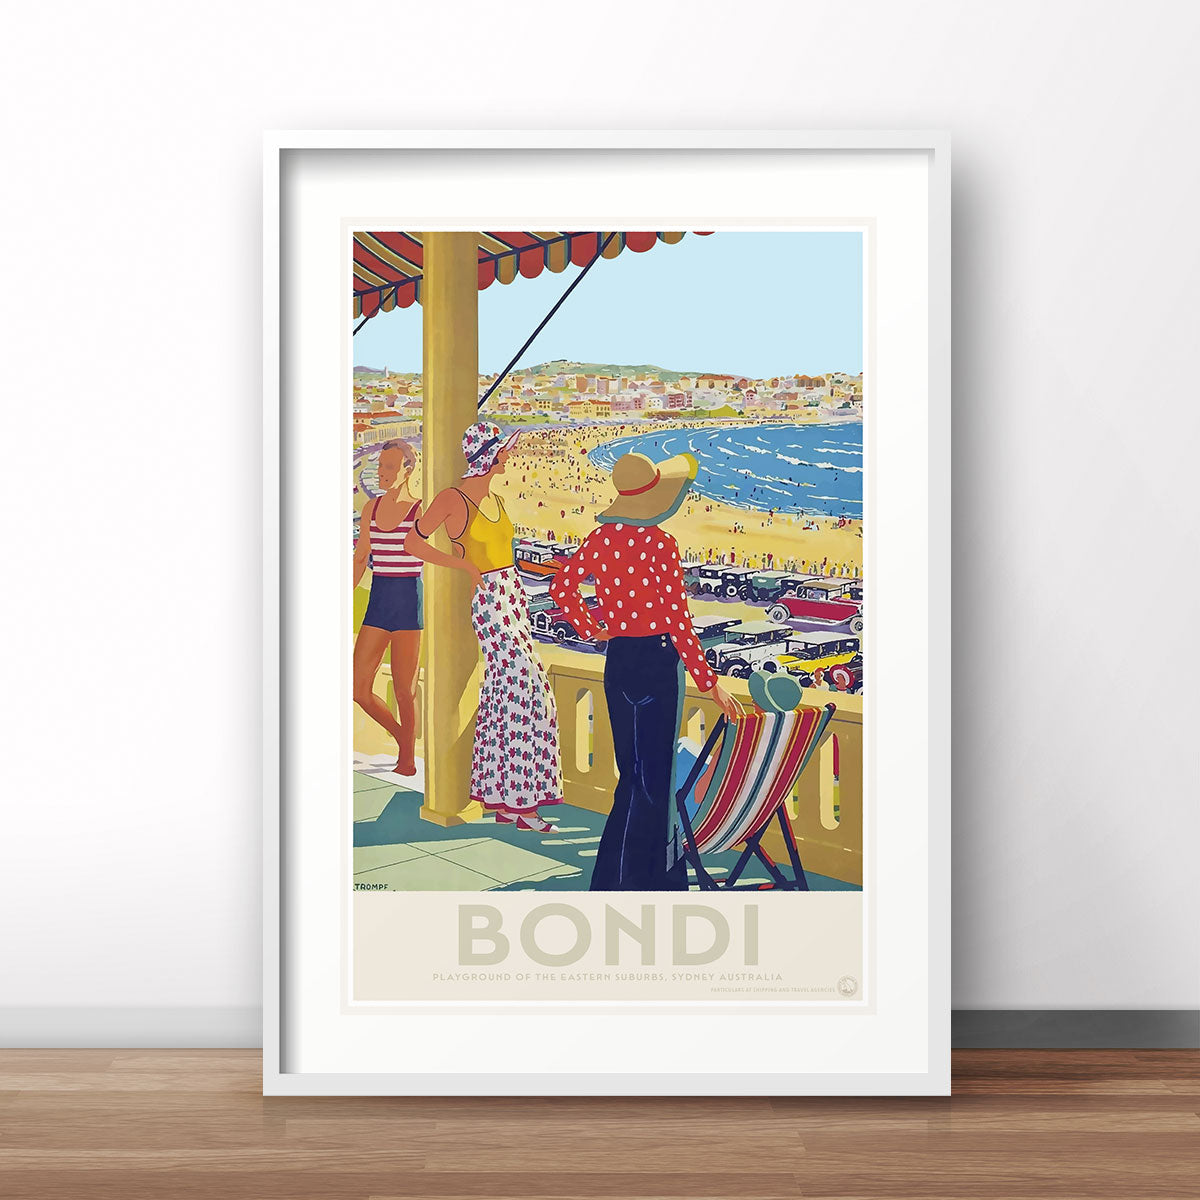 Bondi Sydney vintage advertising poster print from Places We Luv